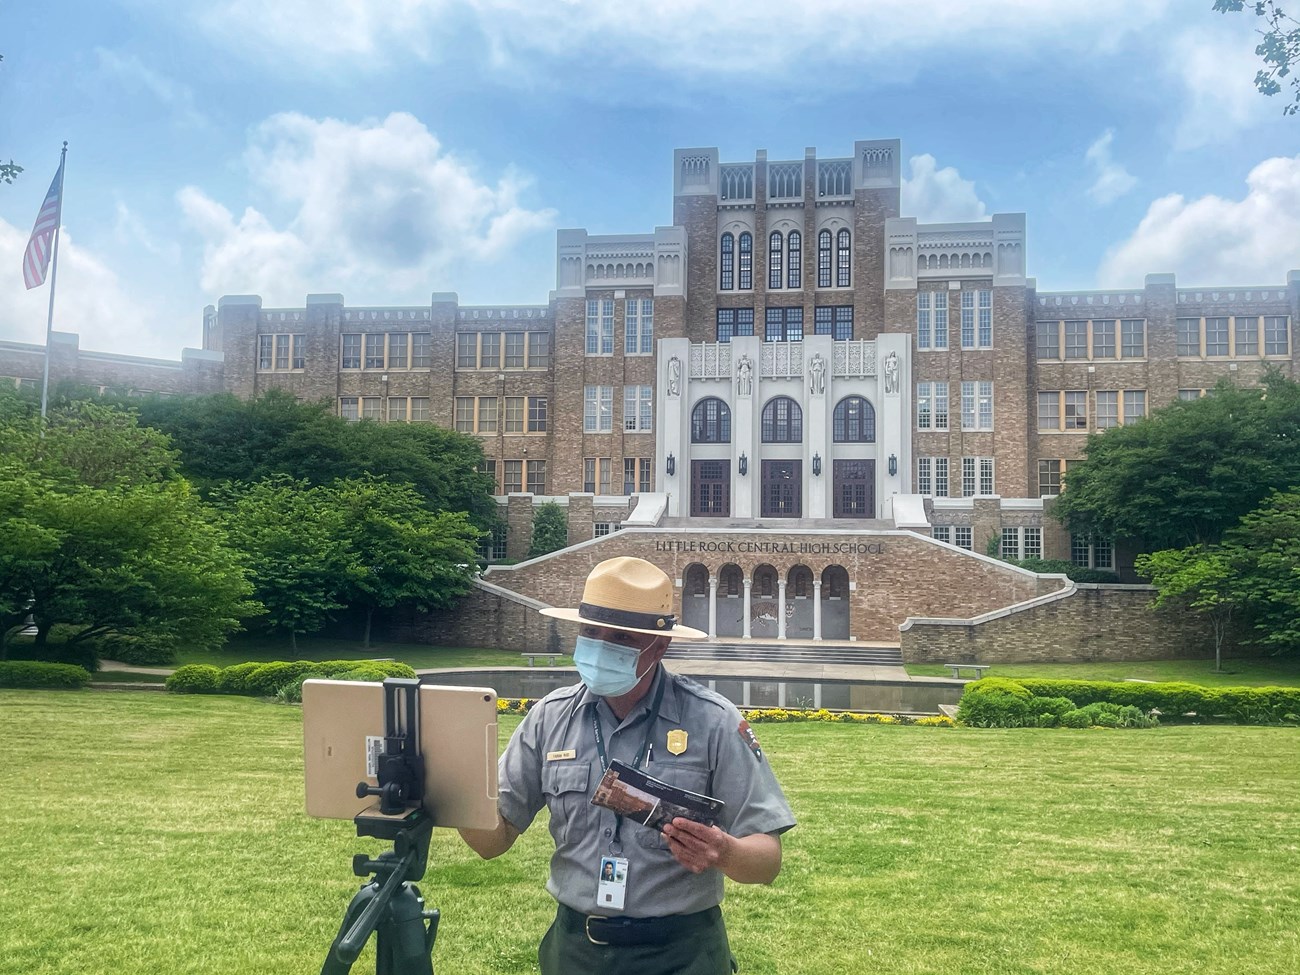 A park ranger uses an iPad & tripod to present a virtual program in front of Central Hiigh School.